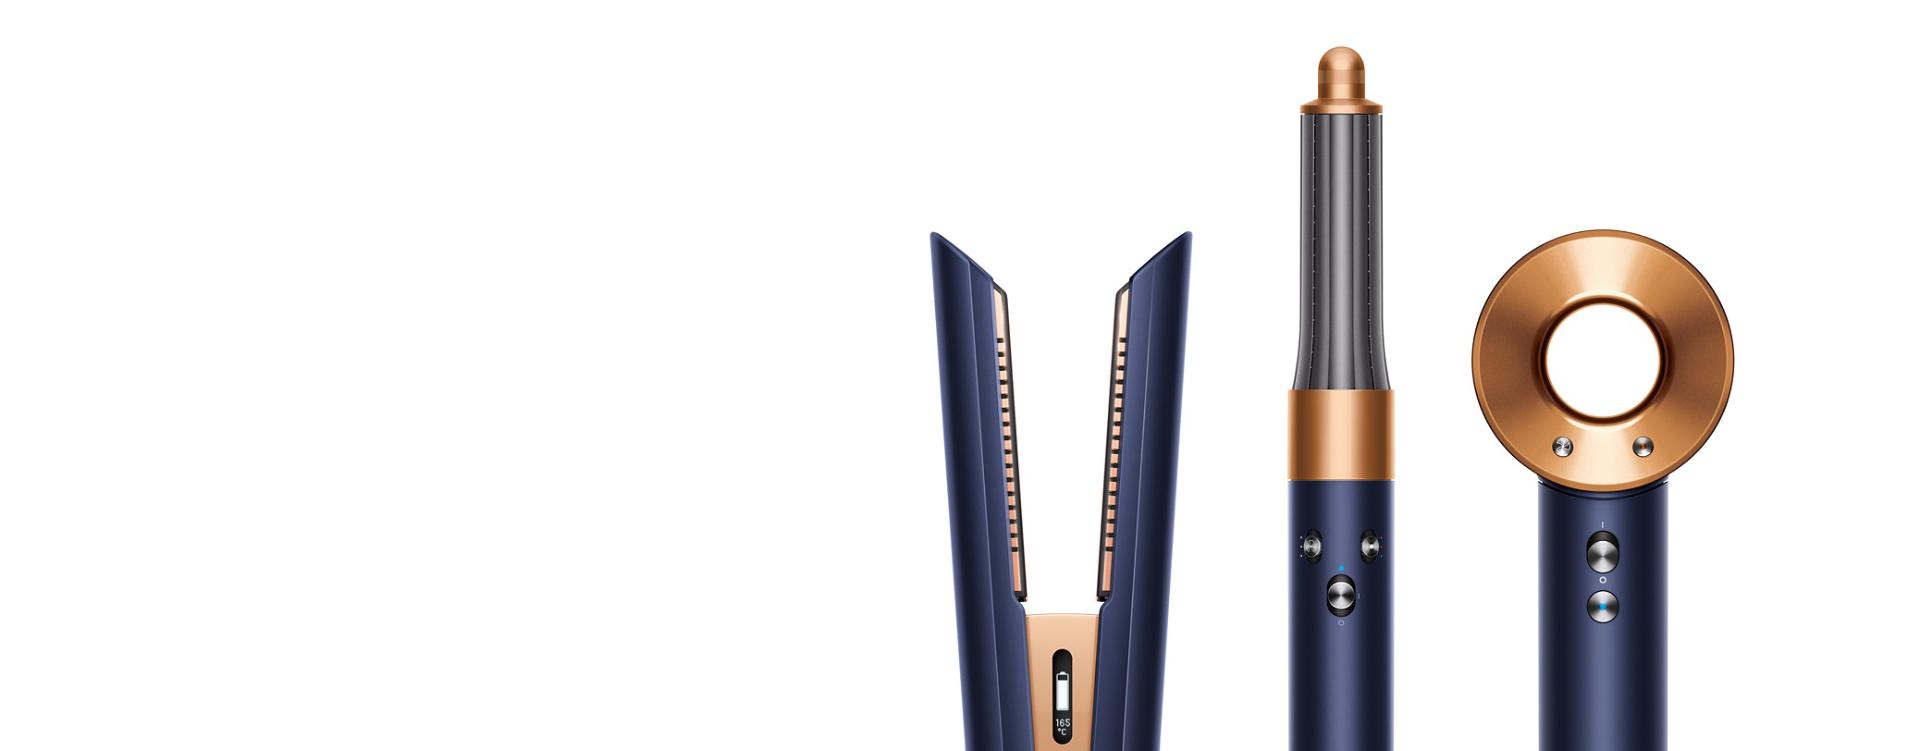 Dyson Corrale straightener, Dyson Airwrap multi-styler and Dyson Supersonic hair dryer